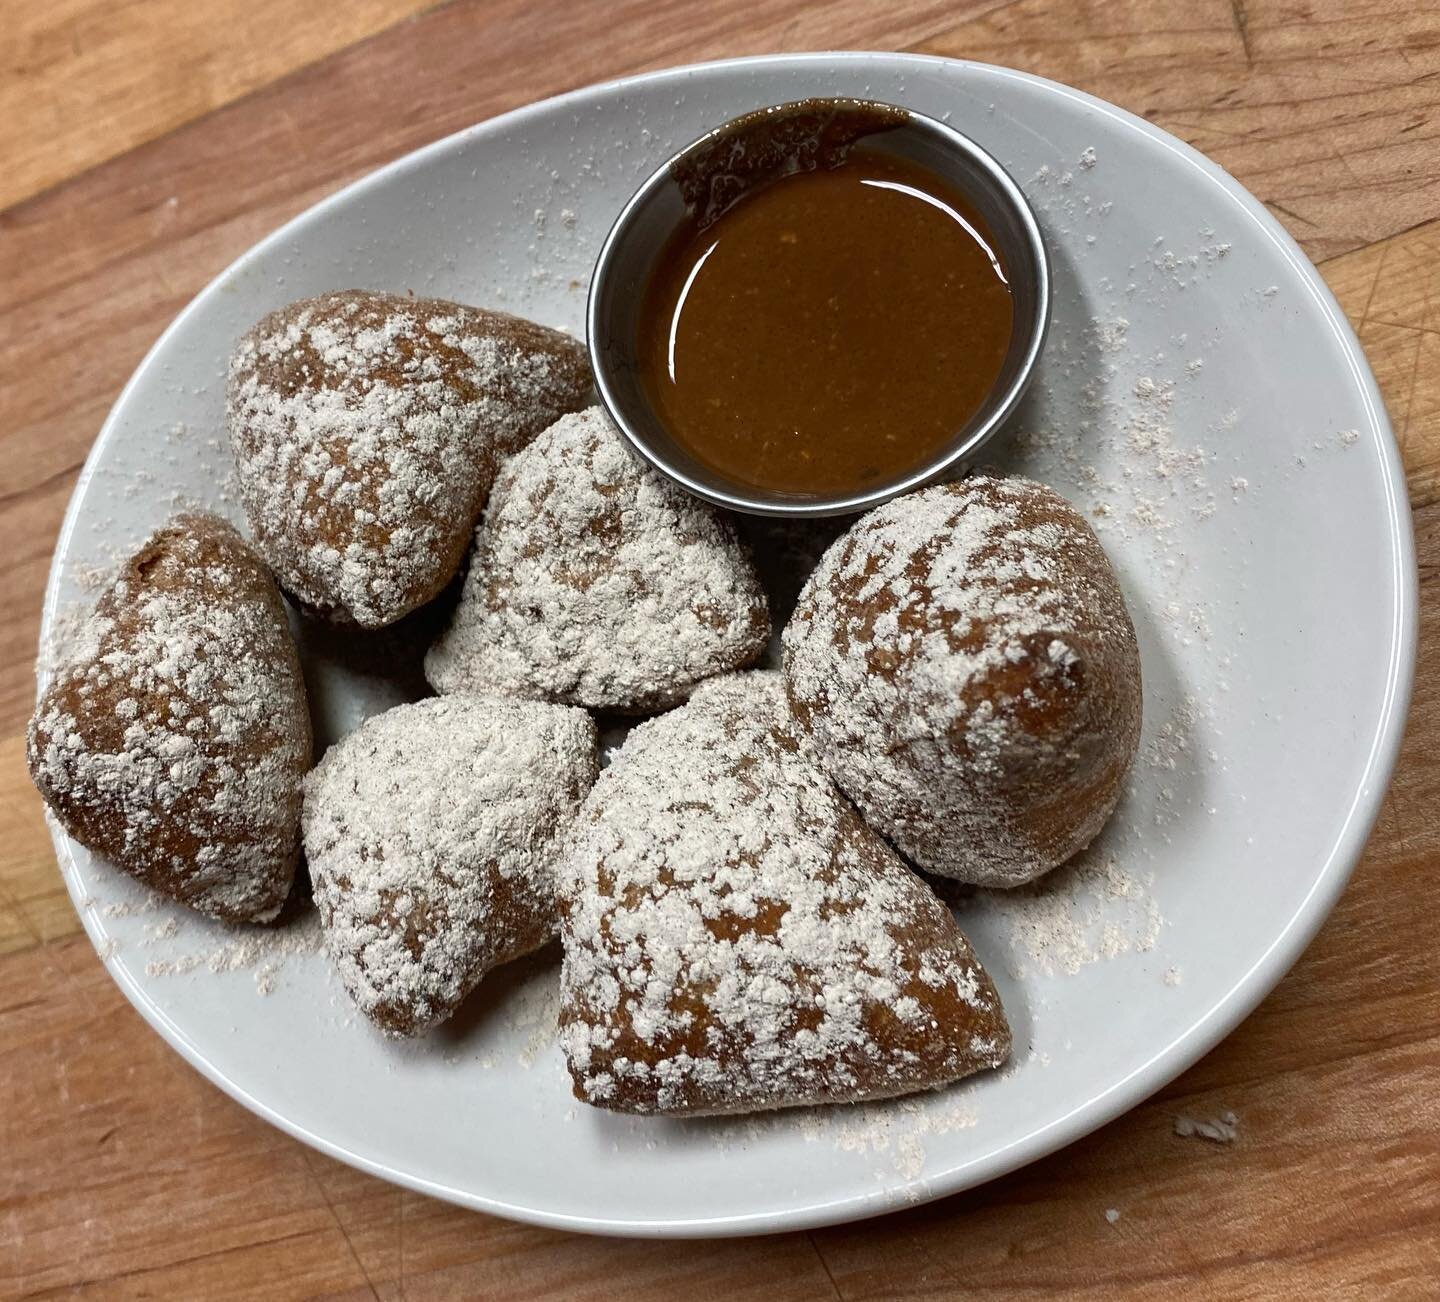 Pretend you&rsquo;re on vacation with our beignets with maple walnut sauce and dollar oysters tonight!

#roc #rocfoodies #oysters